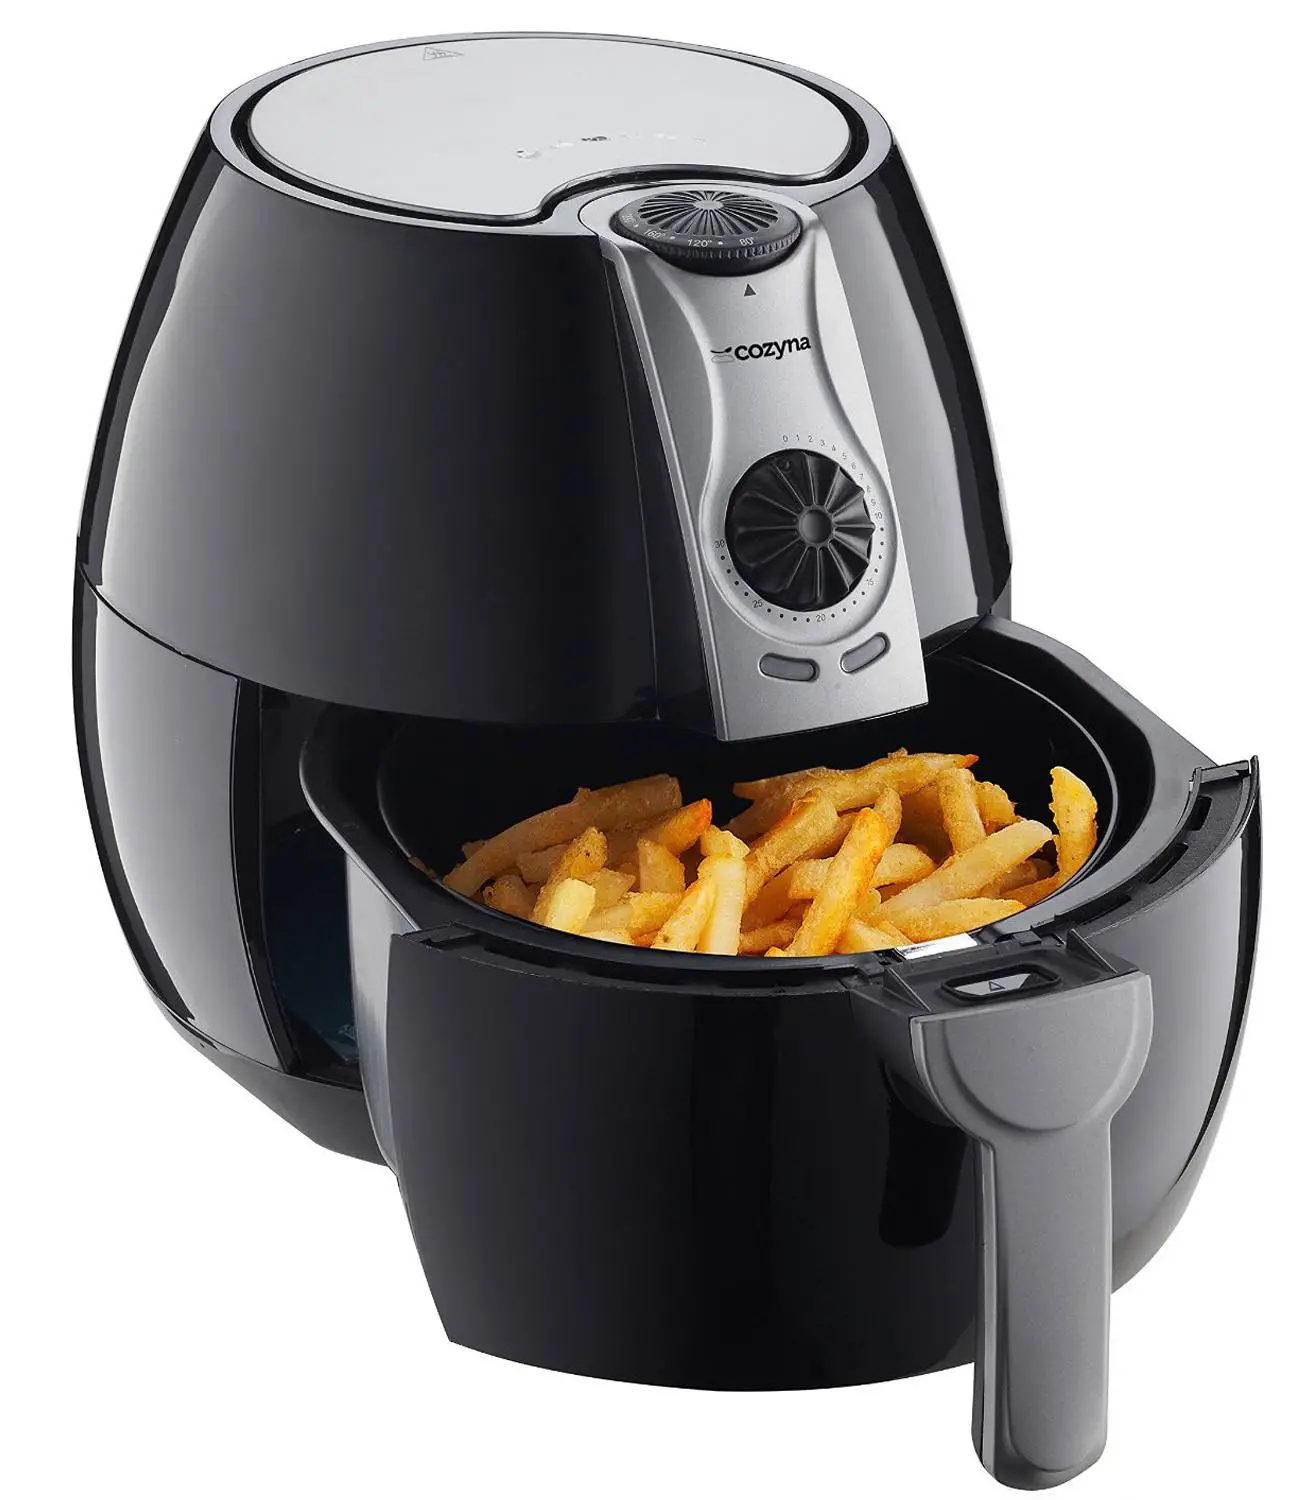 The 5 Best Air Fryer Brands for 2017 (Buying Guide)